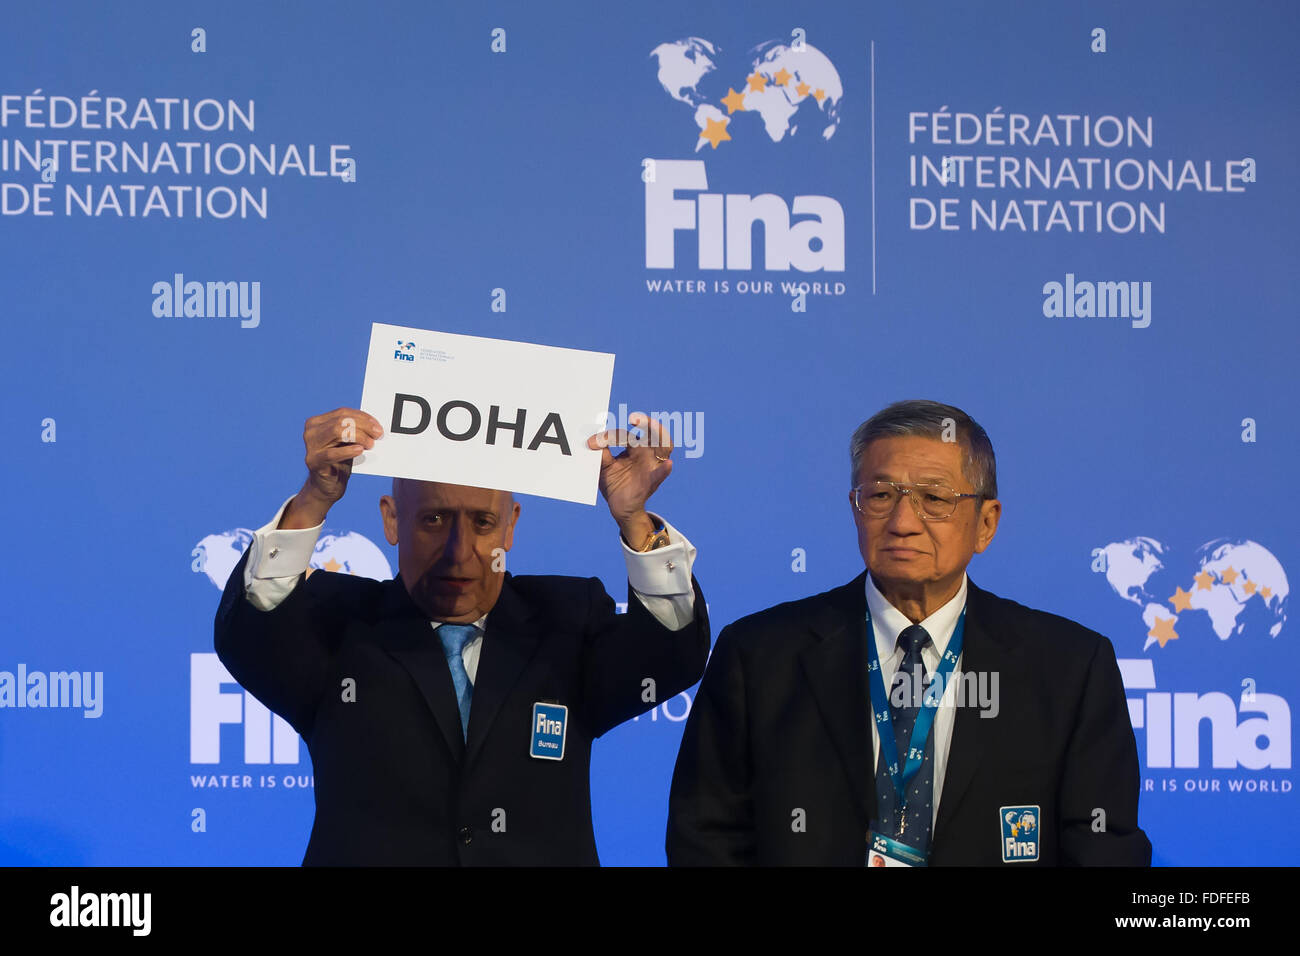 Budapest, Hungary. 31st Jan, 2016. FINA President Julio Maglione (L) holds up the card writing Doha to announce it as the host city of the 2023 World Aquatics Championships at a press conference in Budapest, Hungary, on Jan. 31, 2016. © Attila Volgyi/Xinhua/Alamy Live News Stock Photo